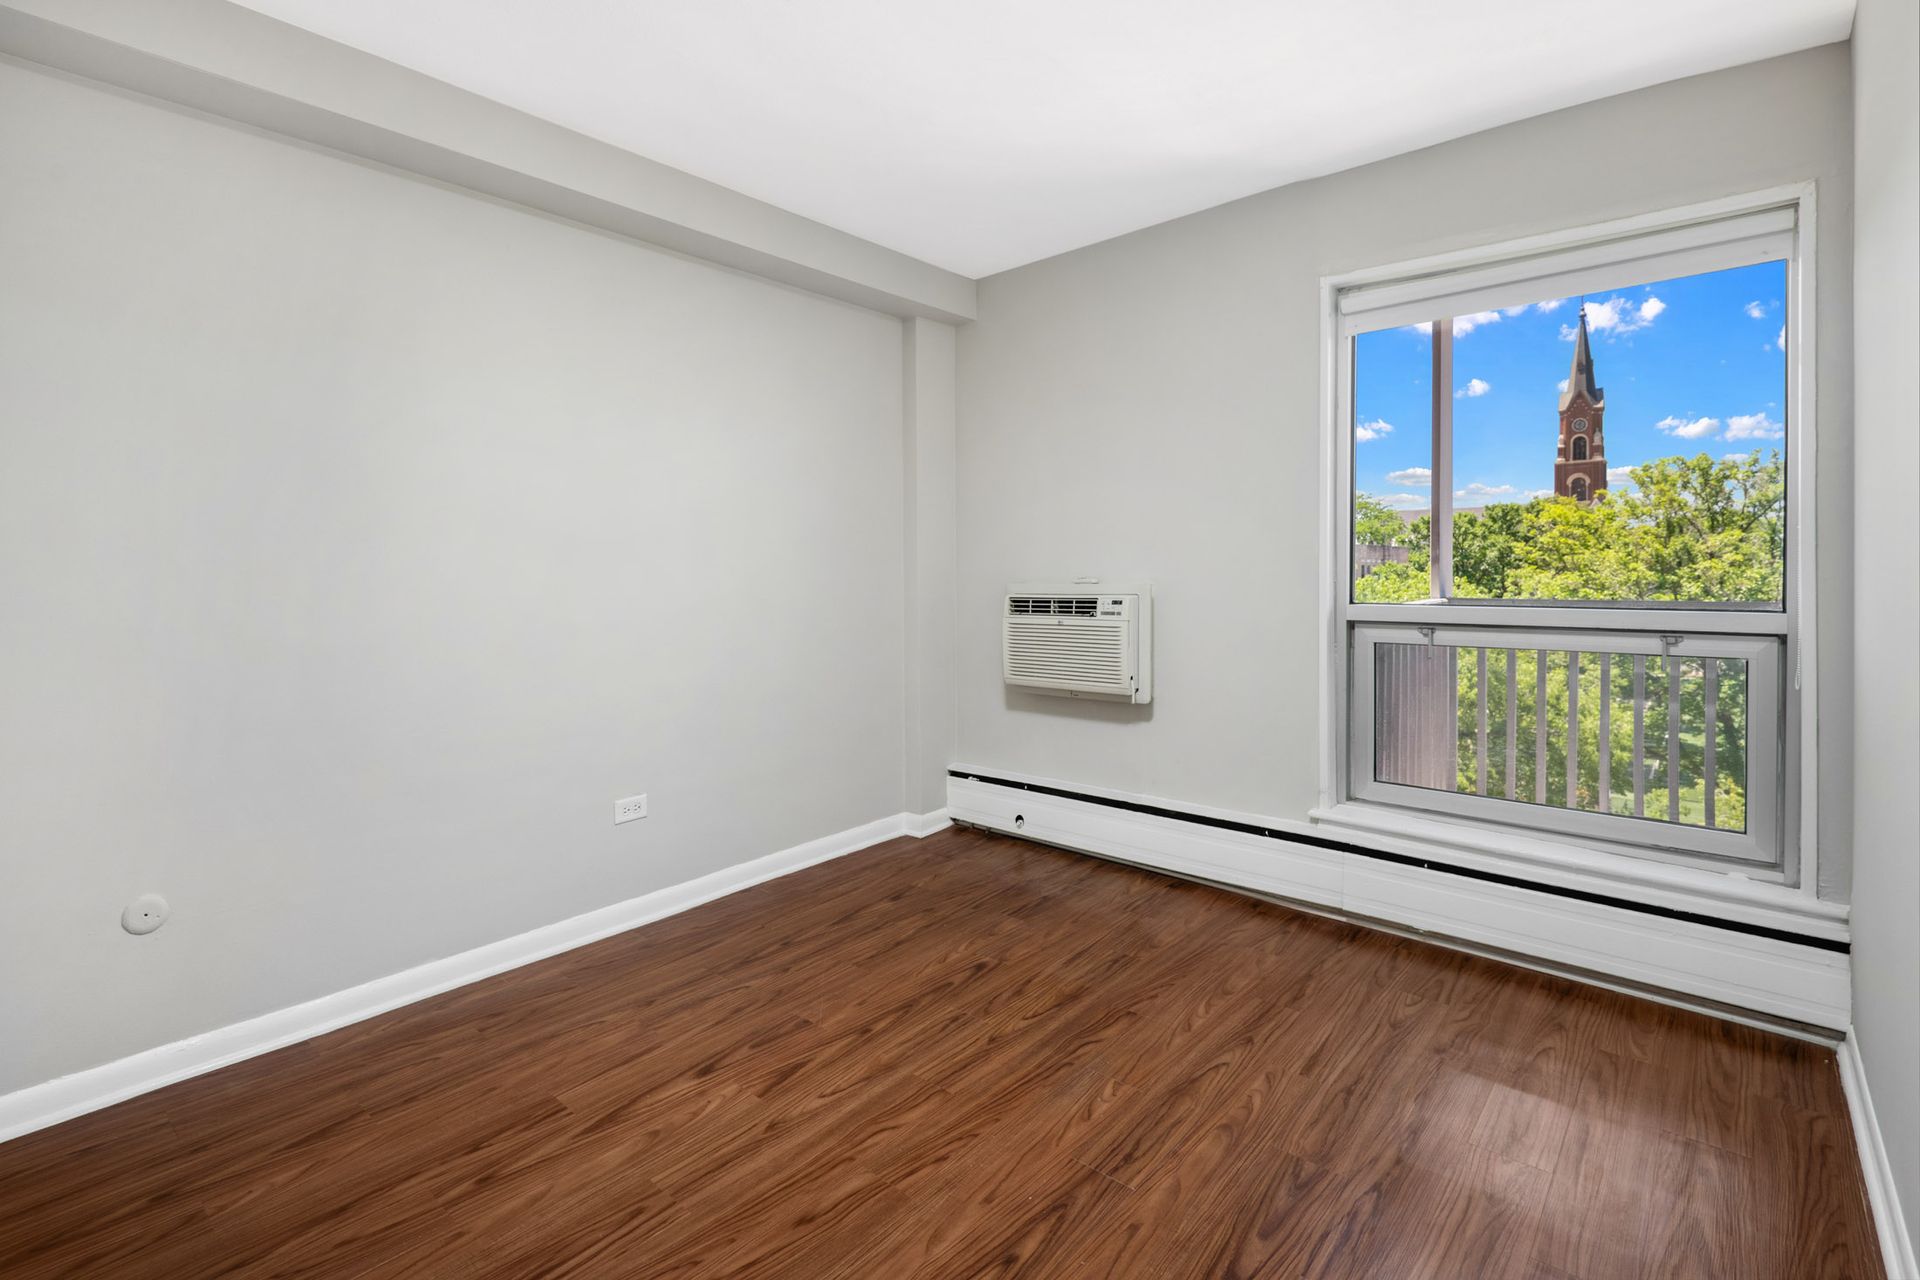 An empty room with hardwood floors and a window with a view of a clock tower  at Reside on North Park.